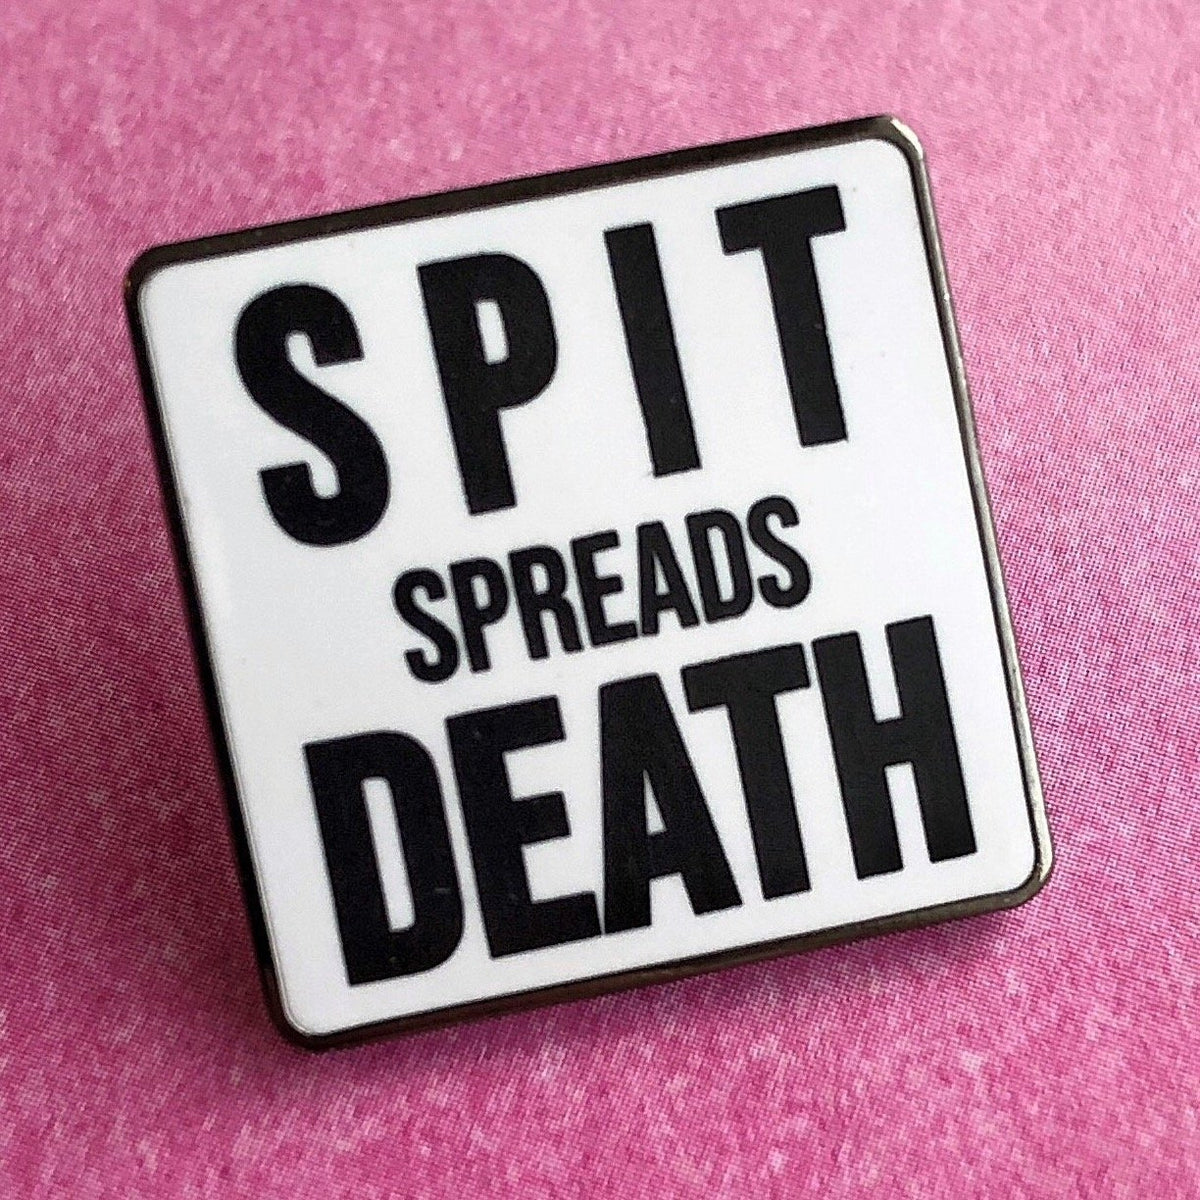 Spit Spreads Death - 1918 Flu Pandemic Pin - Rad Girl Creations